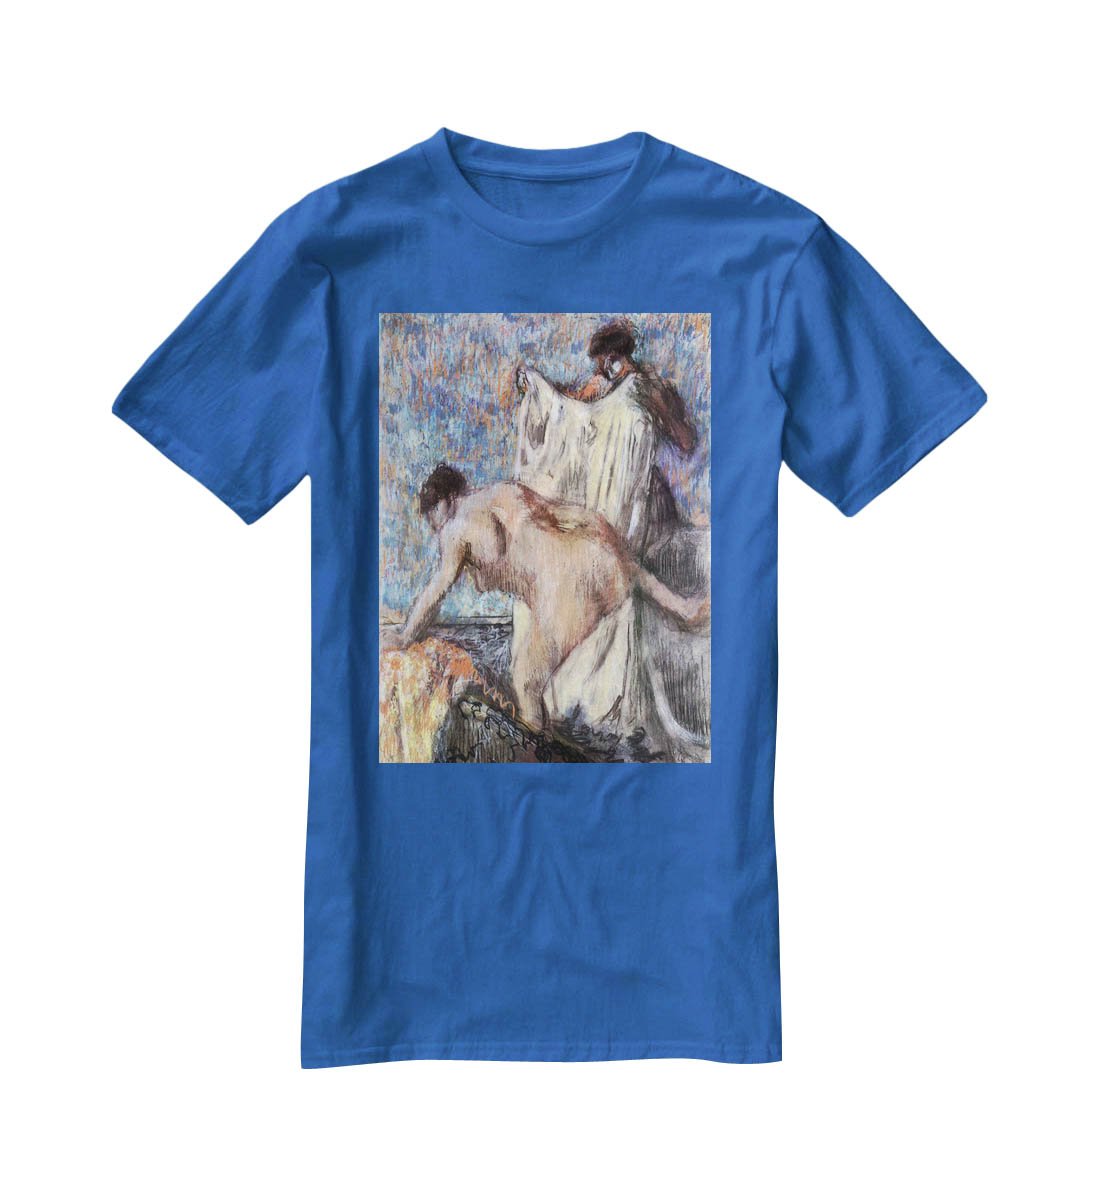 After bathing 3 by Degas T-Shirt - Canvas Art Rocks - 2